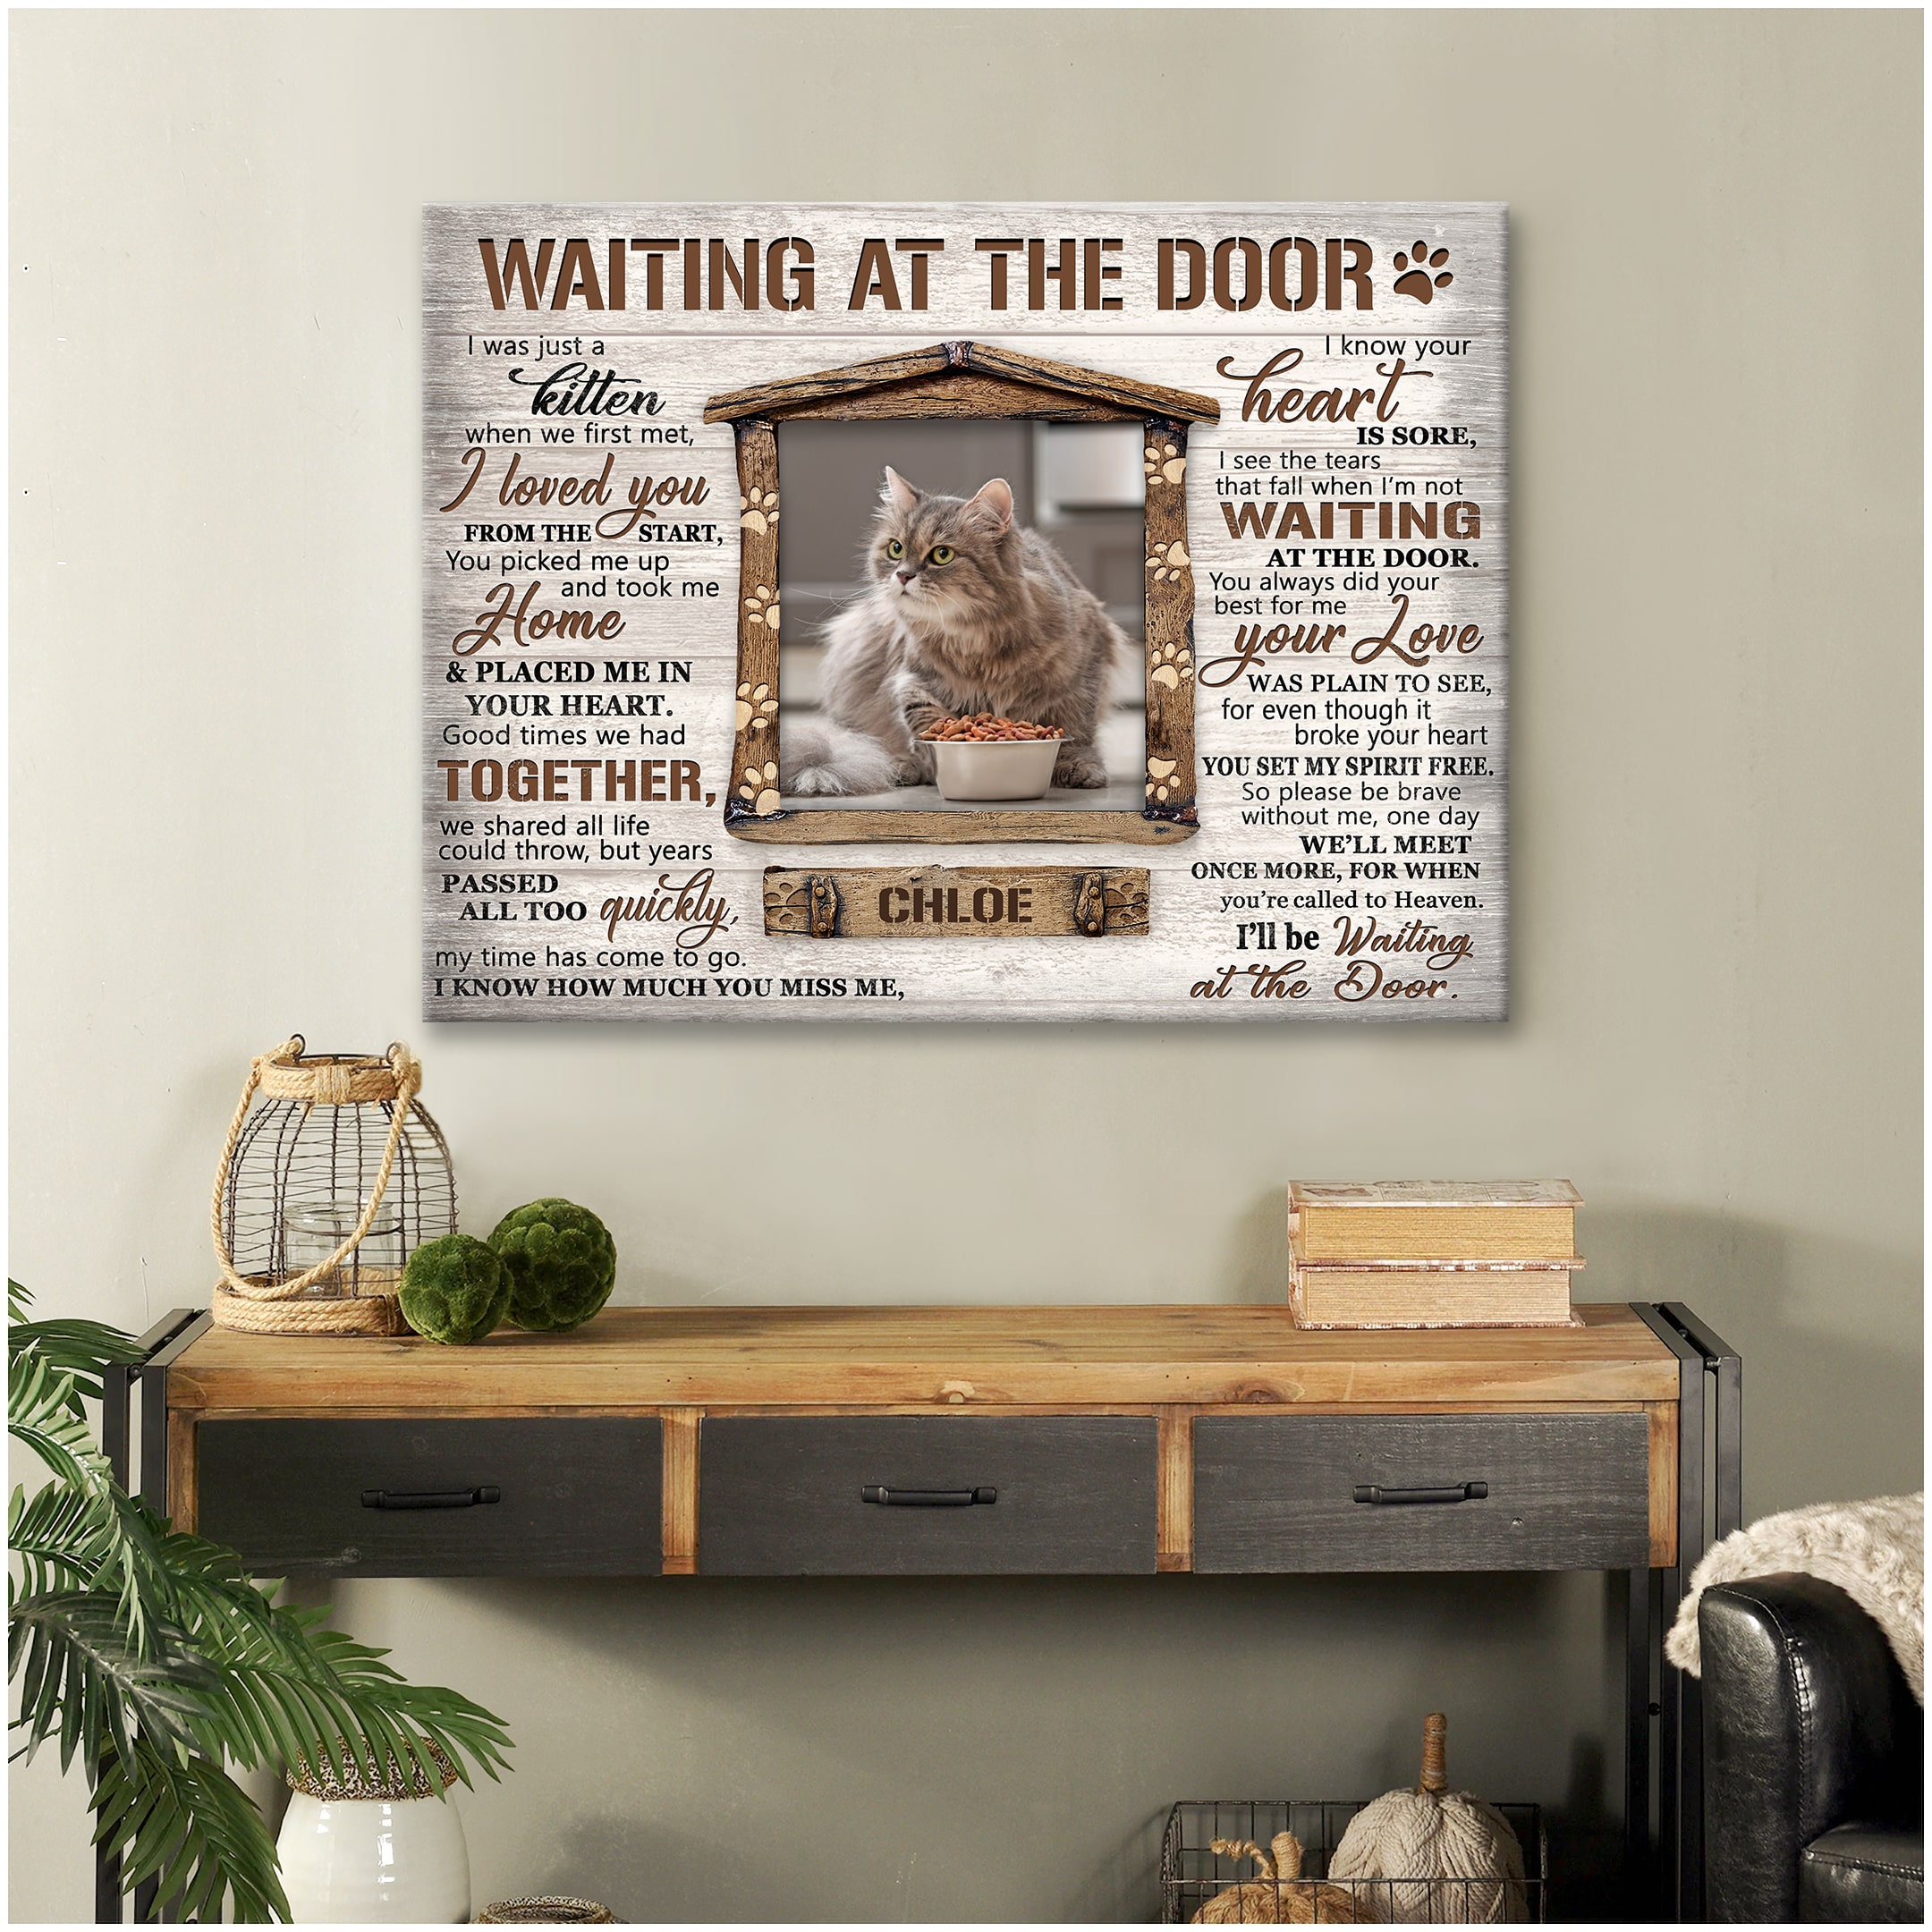 Cat Poster & Canvas, The Cat Rules - Wall Art, Home Decor For Cat Mom, -  OhaPrints